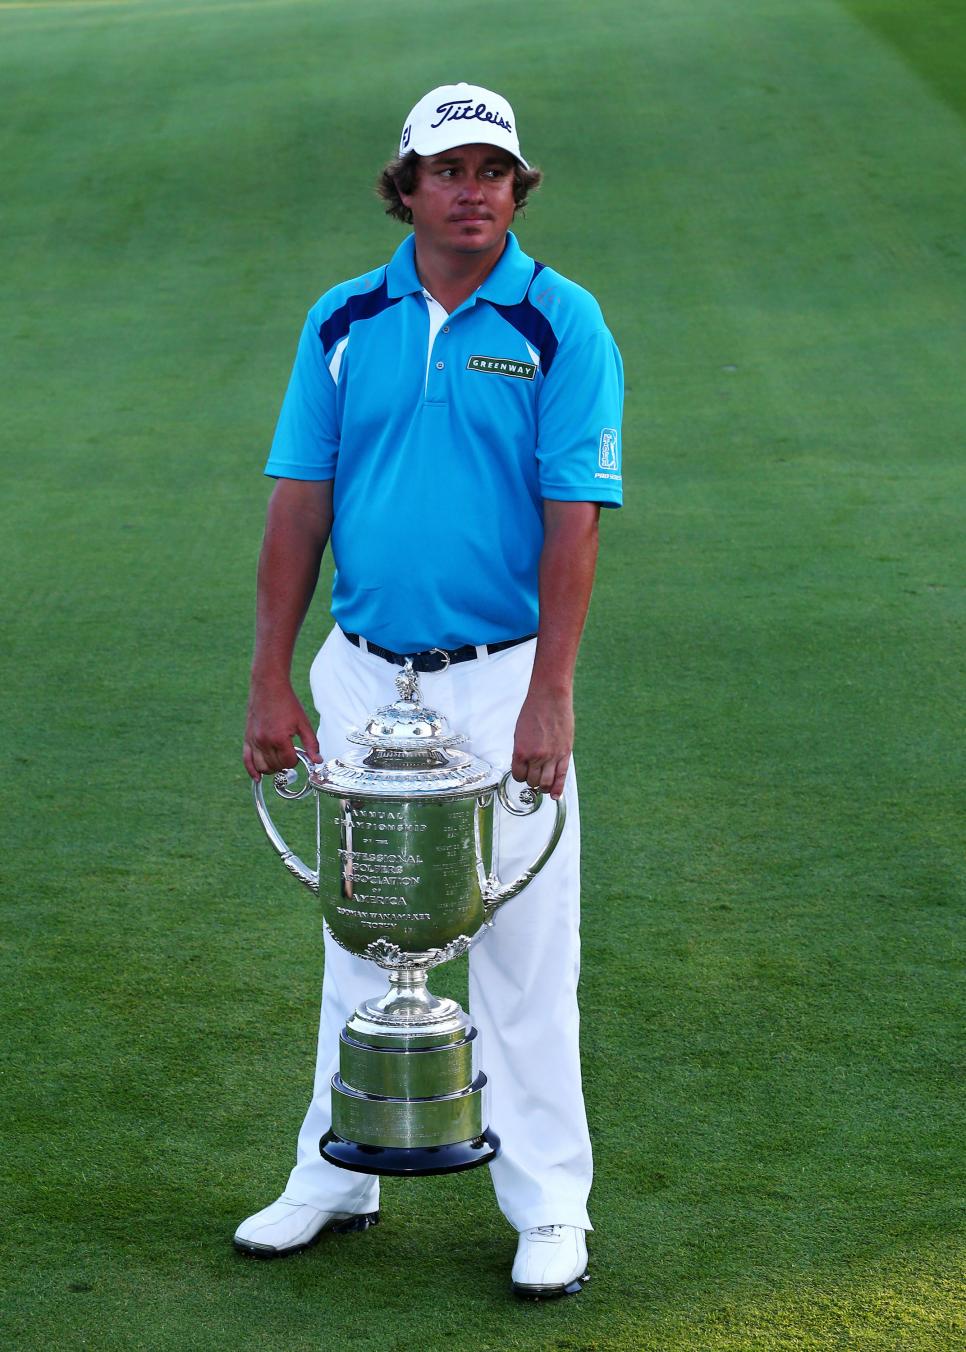 ROCHESTER, NY - AUGUST 11:  Jason Dufner of the United States poses with the Wanamaker Trophy after his two-stroke victory at the 95th PGA Championship at Oak Hill Country Club on August 11, 2013 in Rochester, New York.  (Photo by Streeter Lecka/Getty Images)